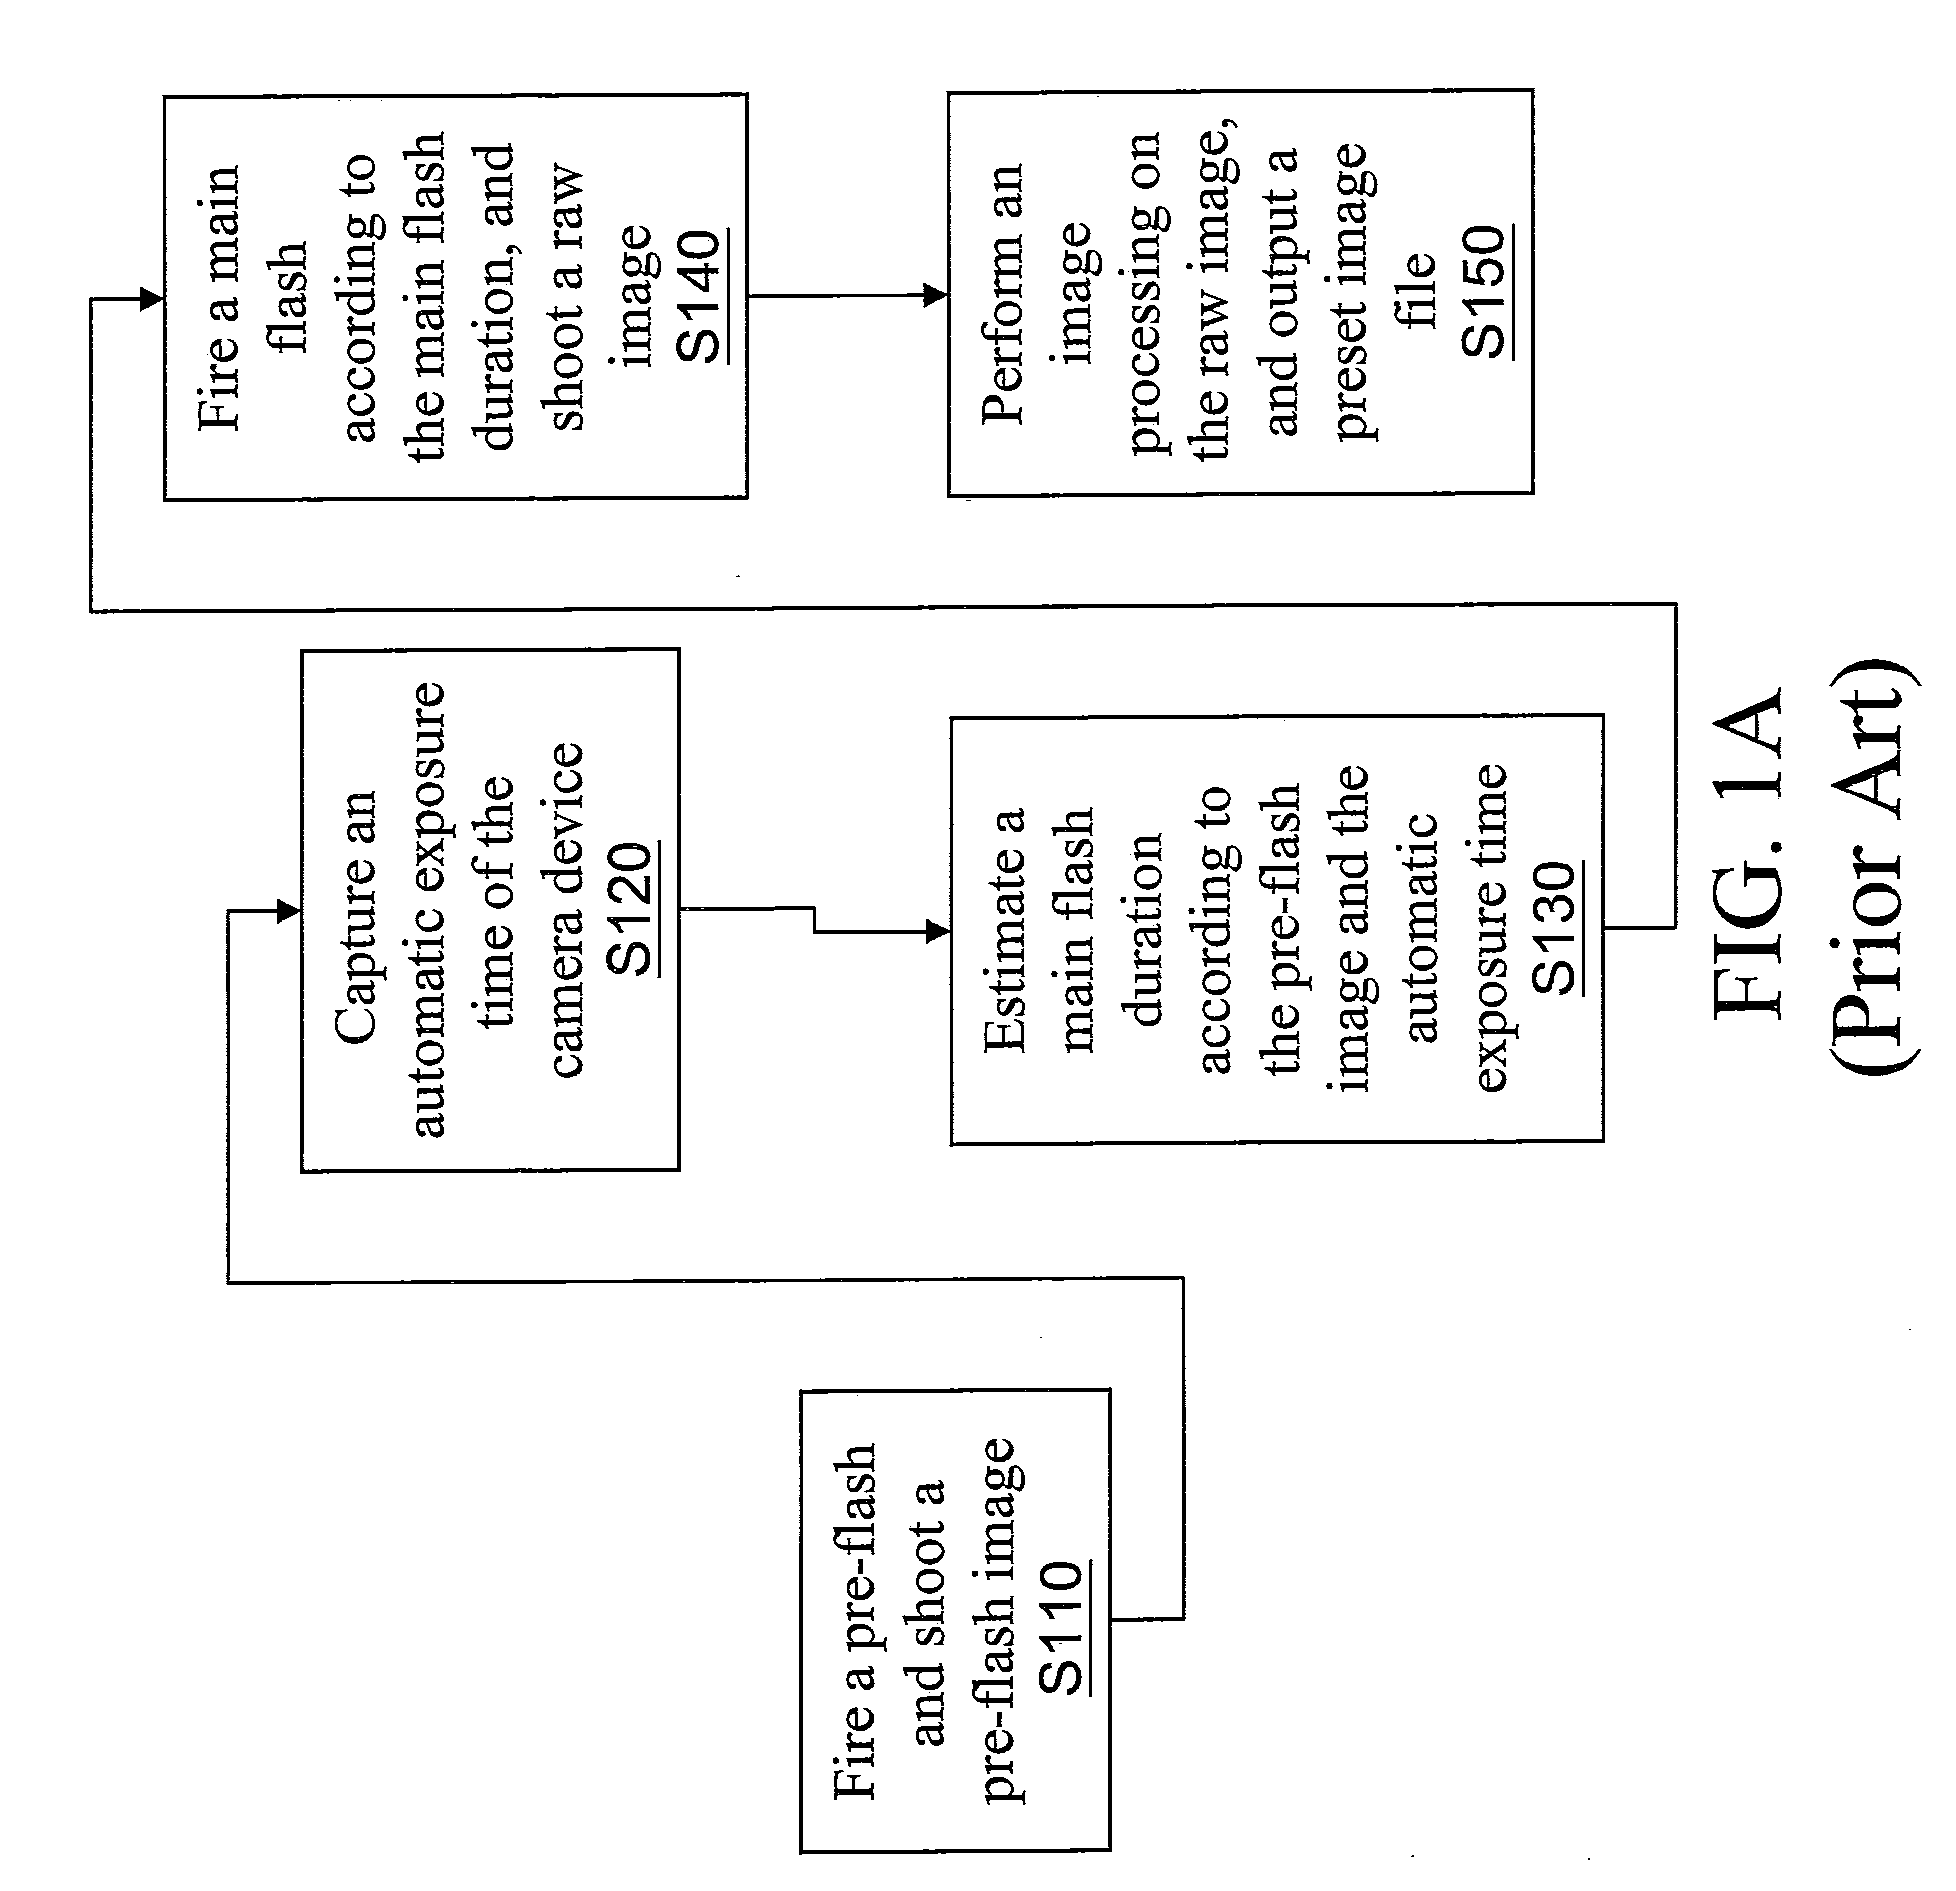 Image brightness compensation method and digital camera device with image brightness compensation function